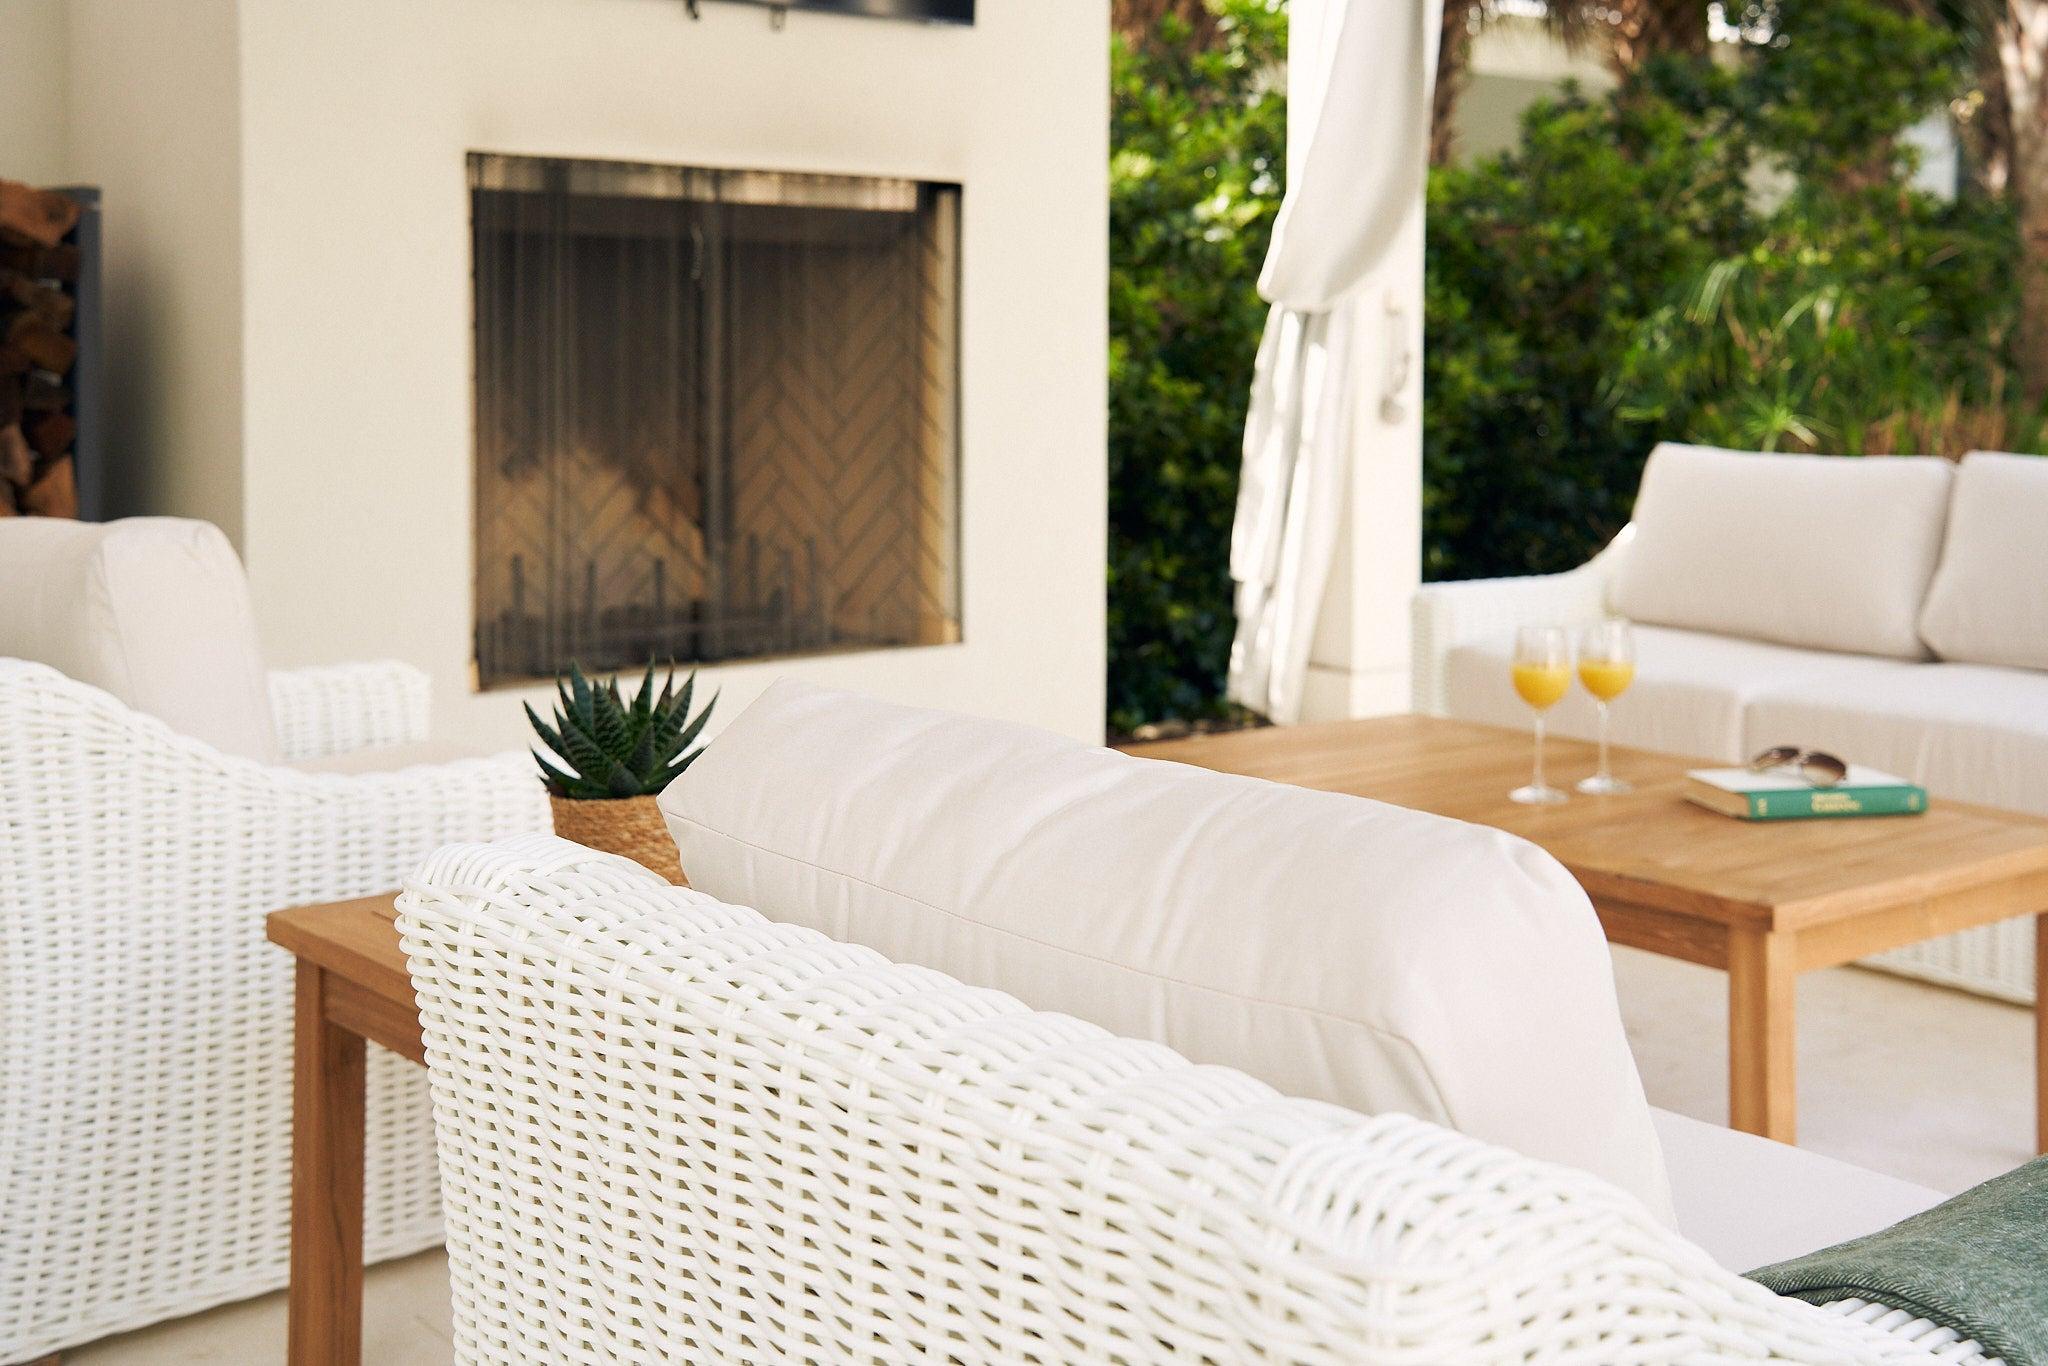 White Wicker Outdoor Sofa, Club Chairs And Coffee Table